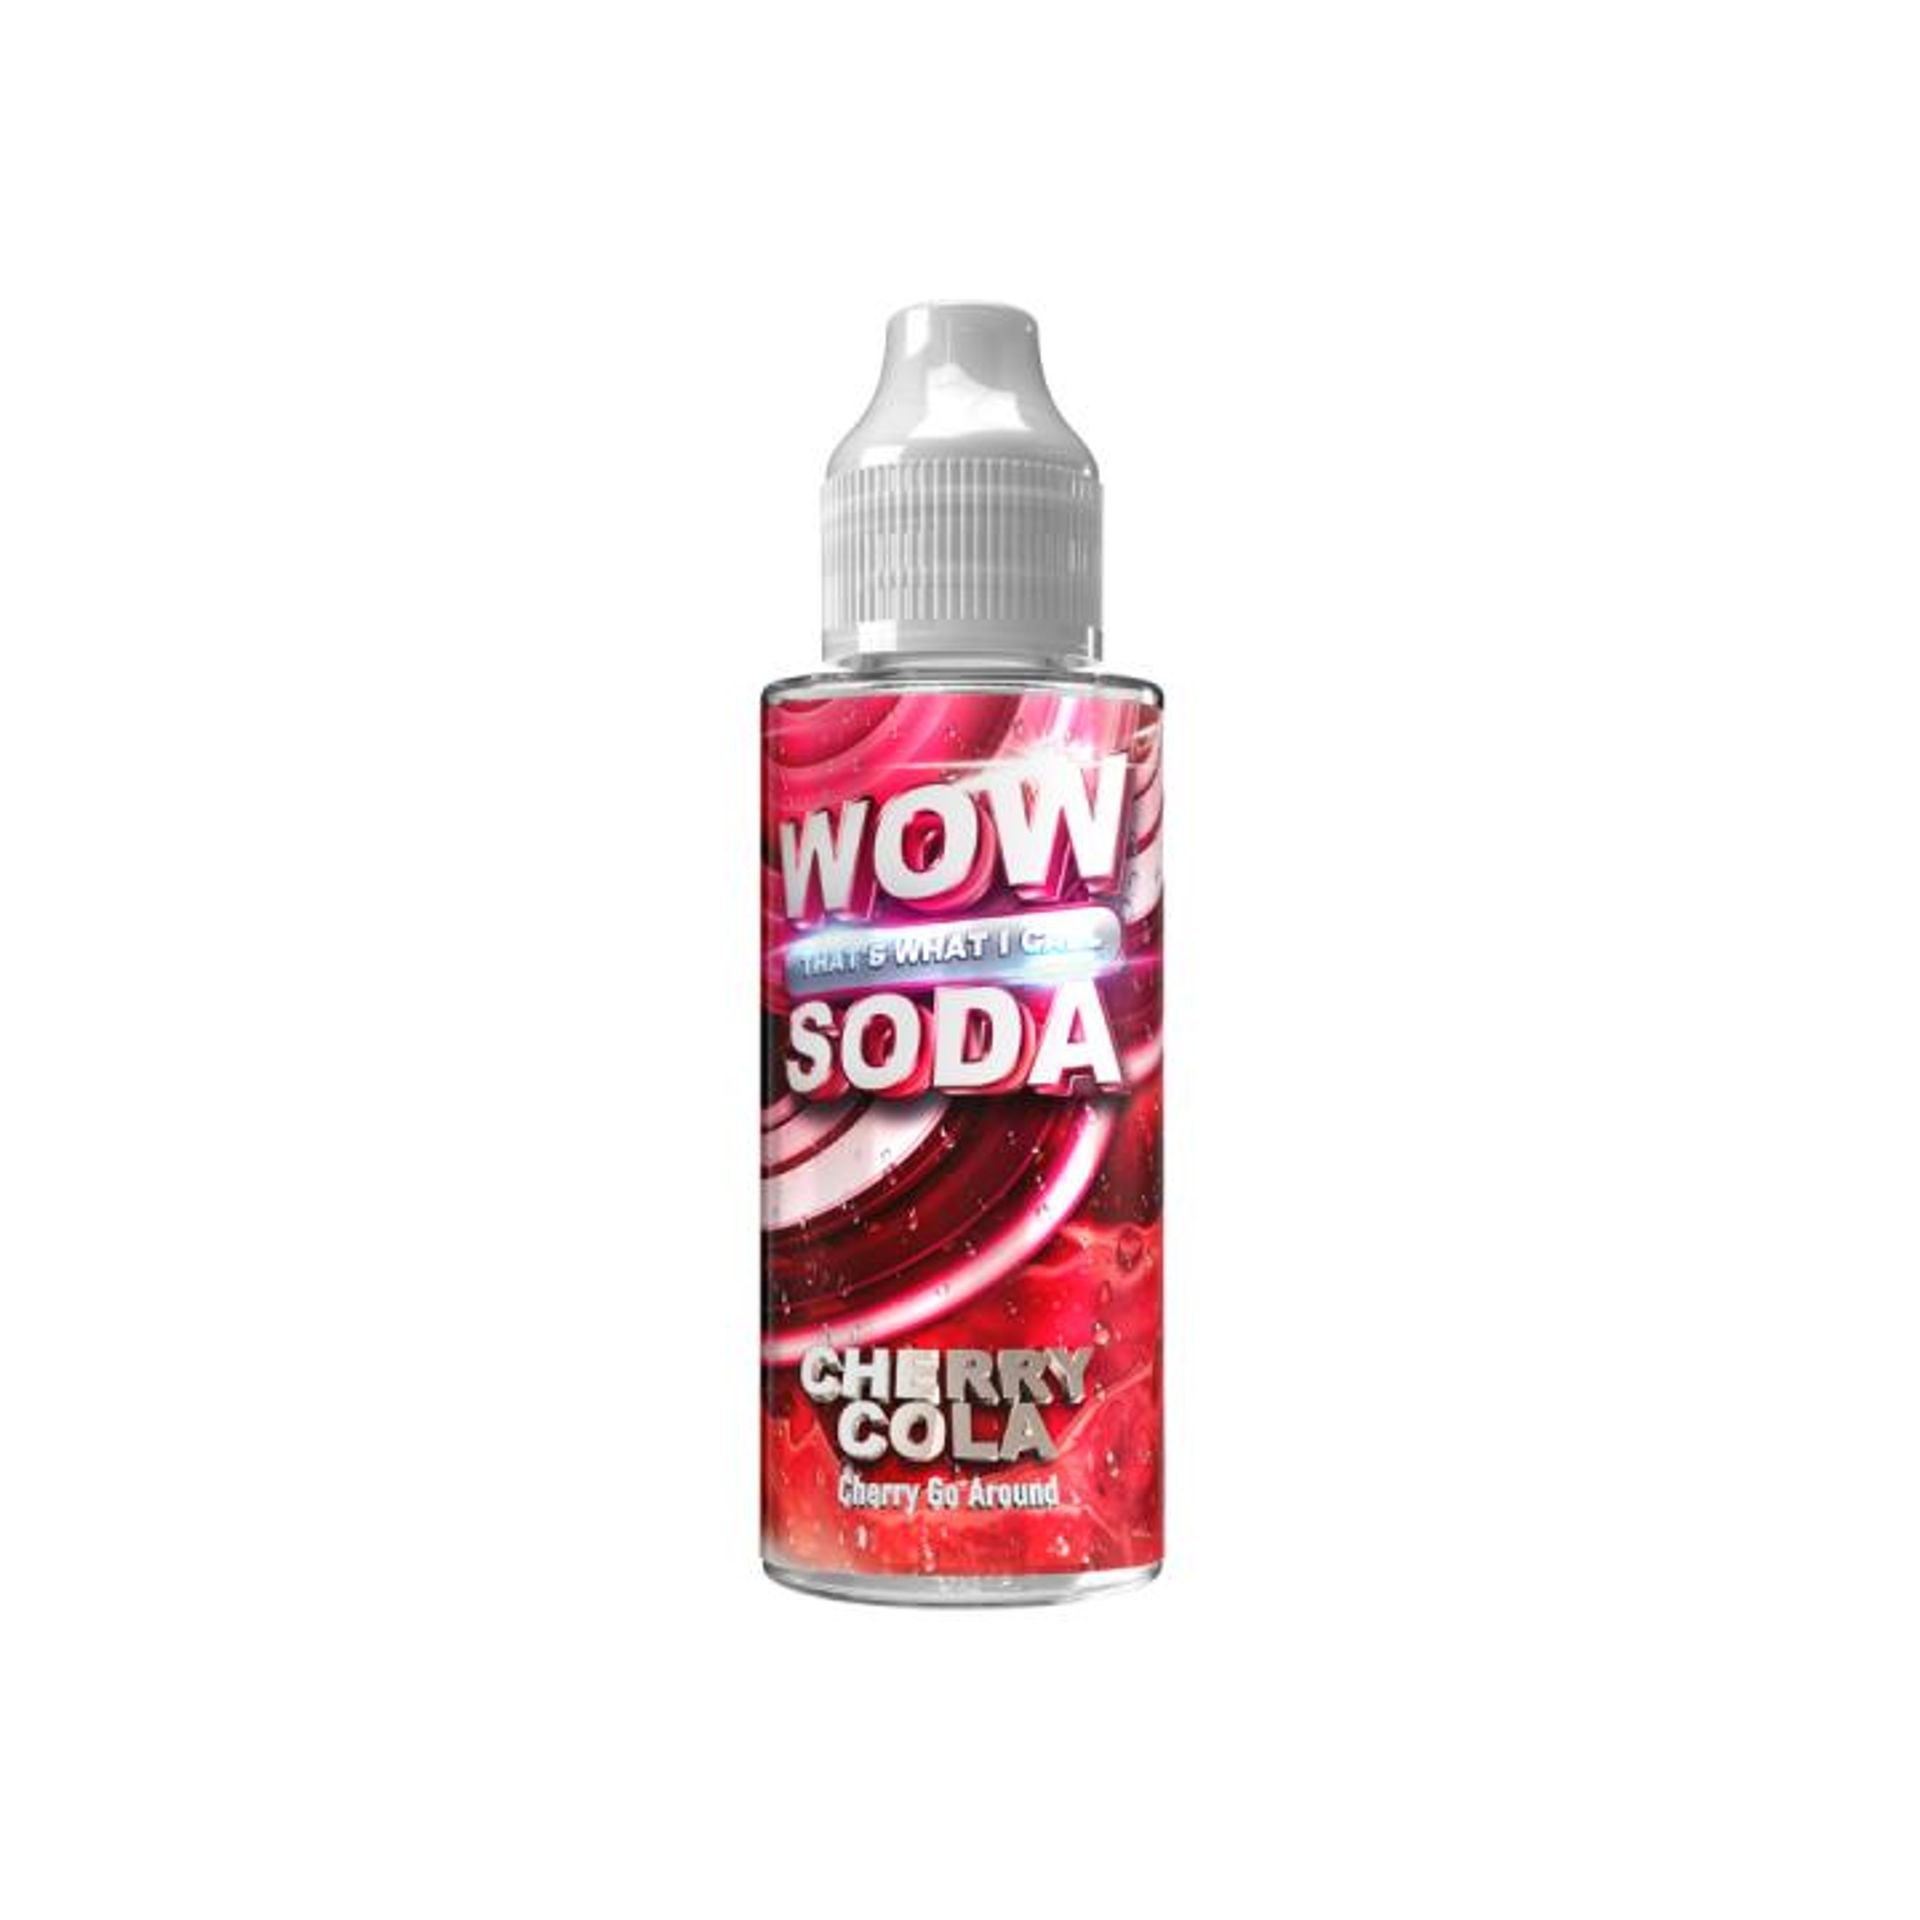 Image of Cherry Cola by Wow Thats What I Call